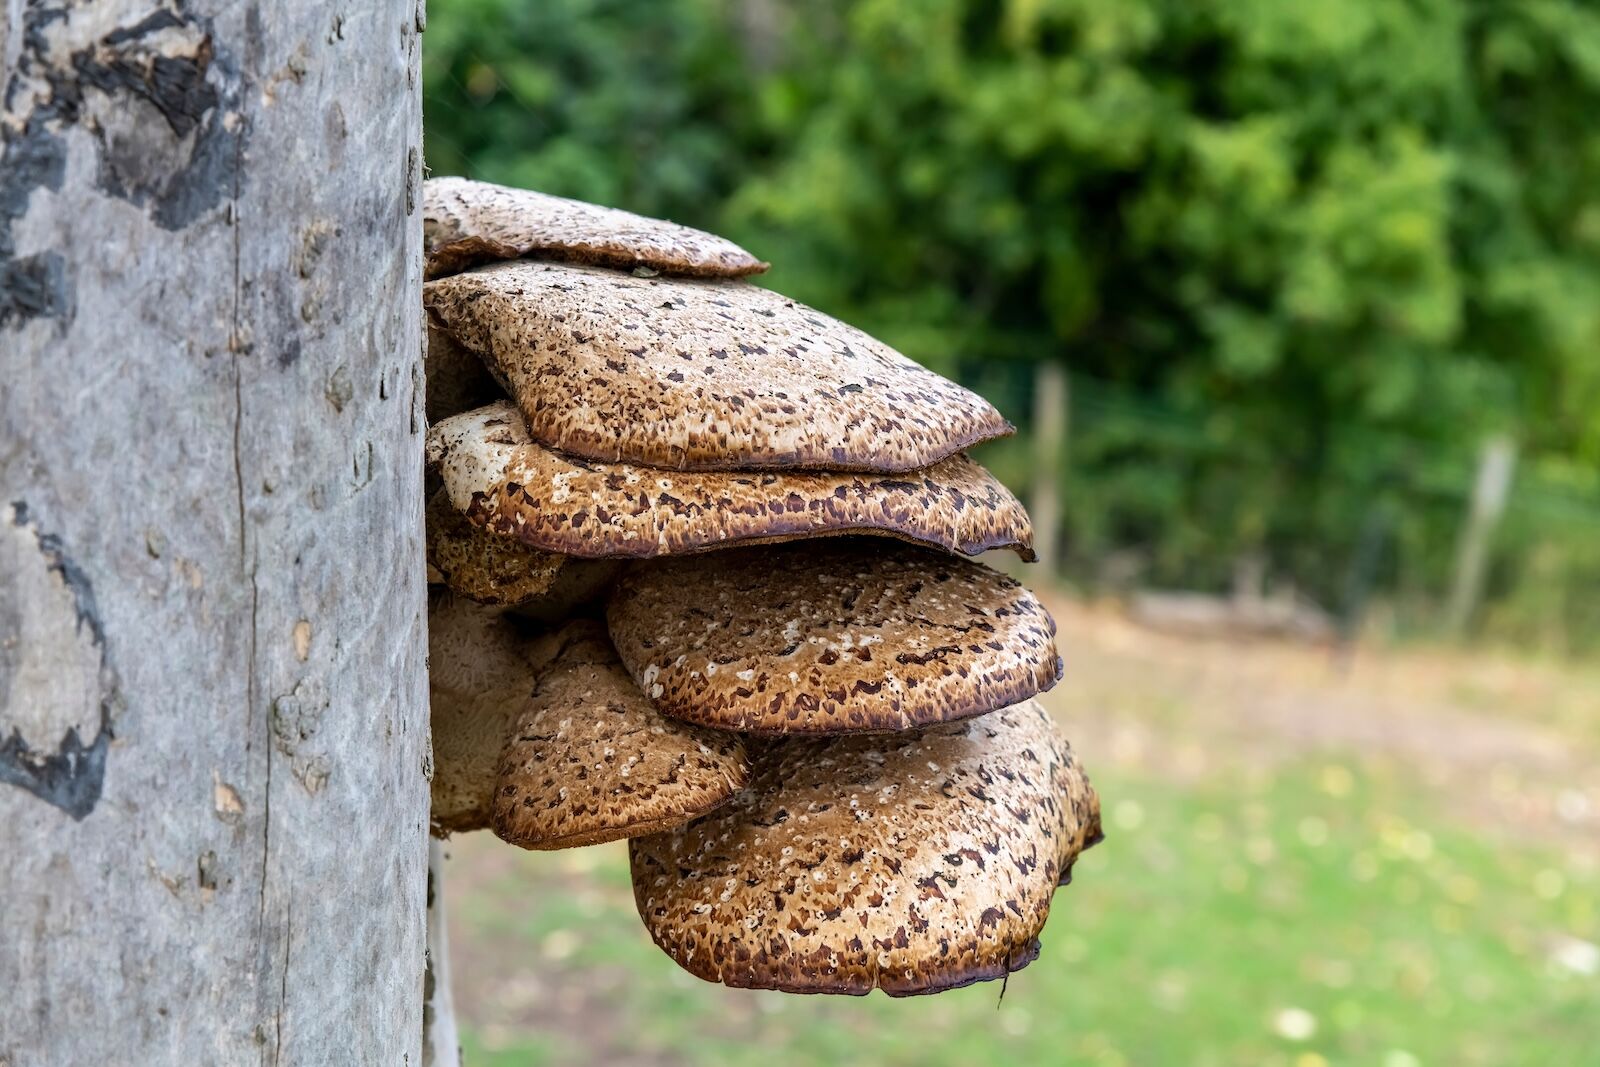 Close up view of layers of Dryad’s Saddle fungus (Polyporus squamosus) on the side of a wooden pole with the background green out of focus